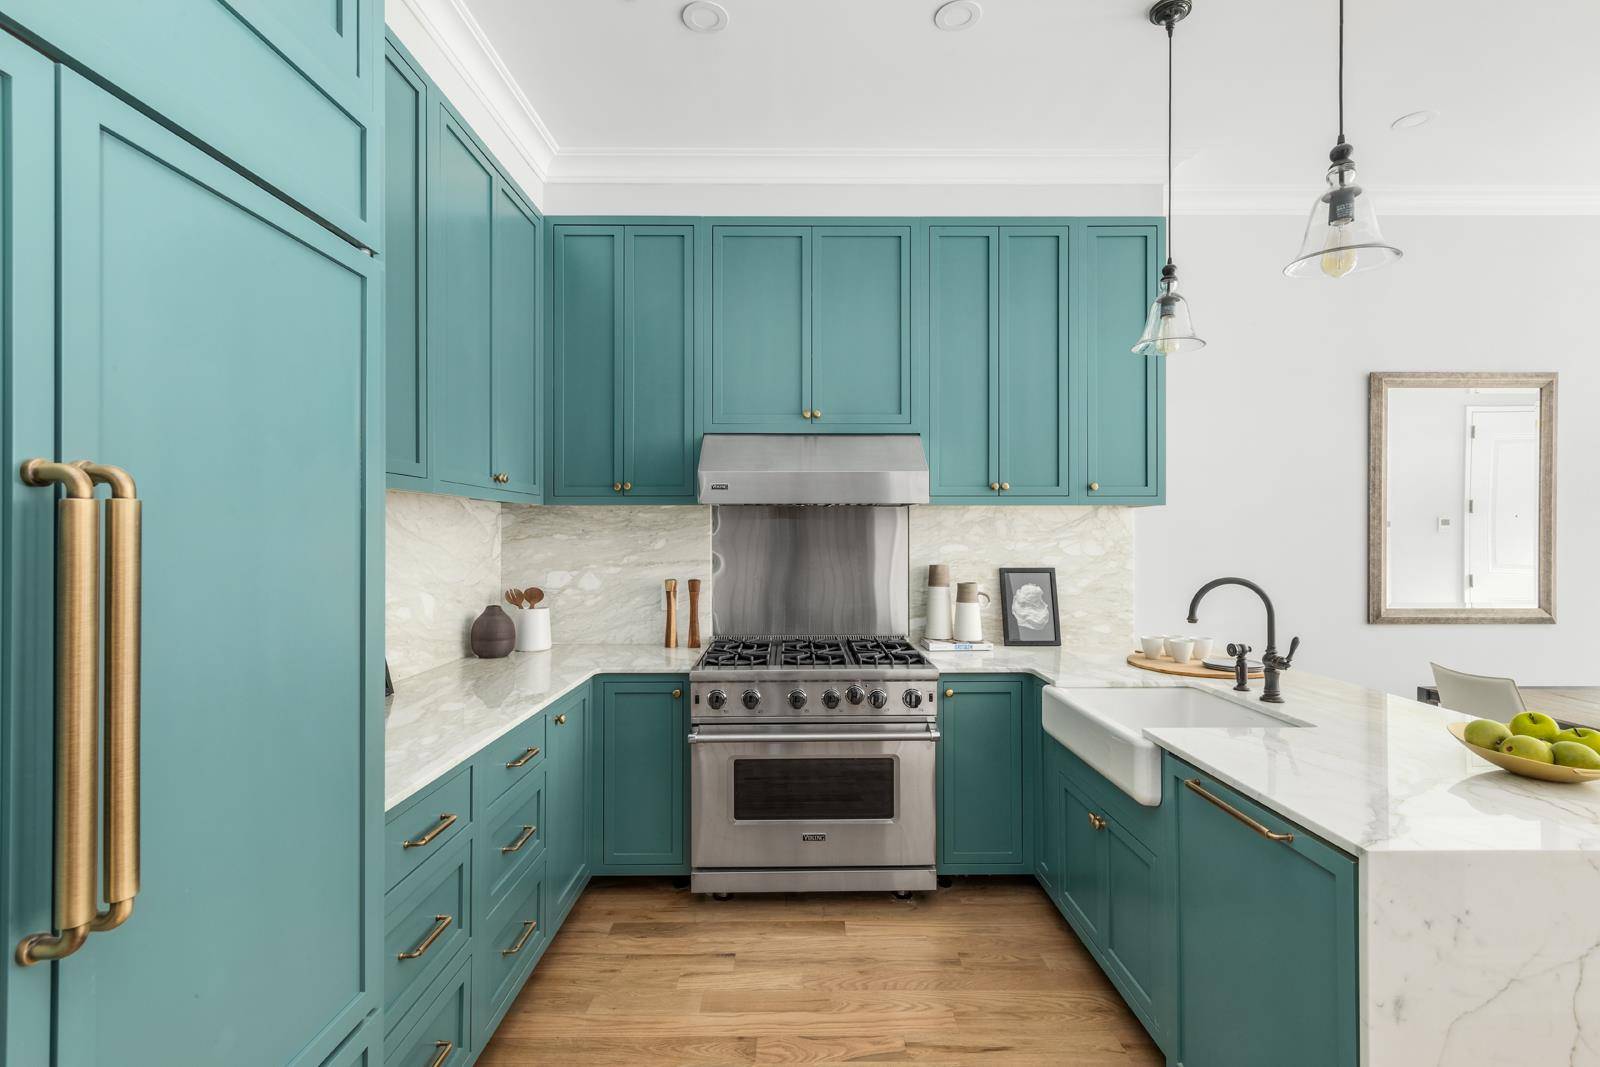 Located on a sunny corner in the heart of coveted Boerum Hill, 118 Douglass Street is an impeccable new condominium offering townhouse style homes each with private garage parking.